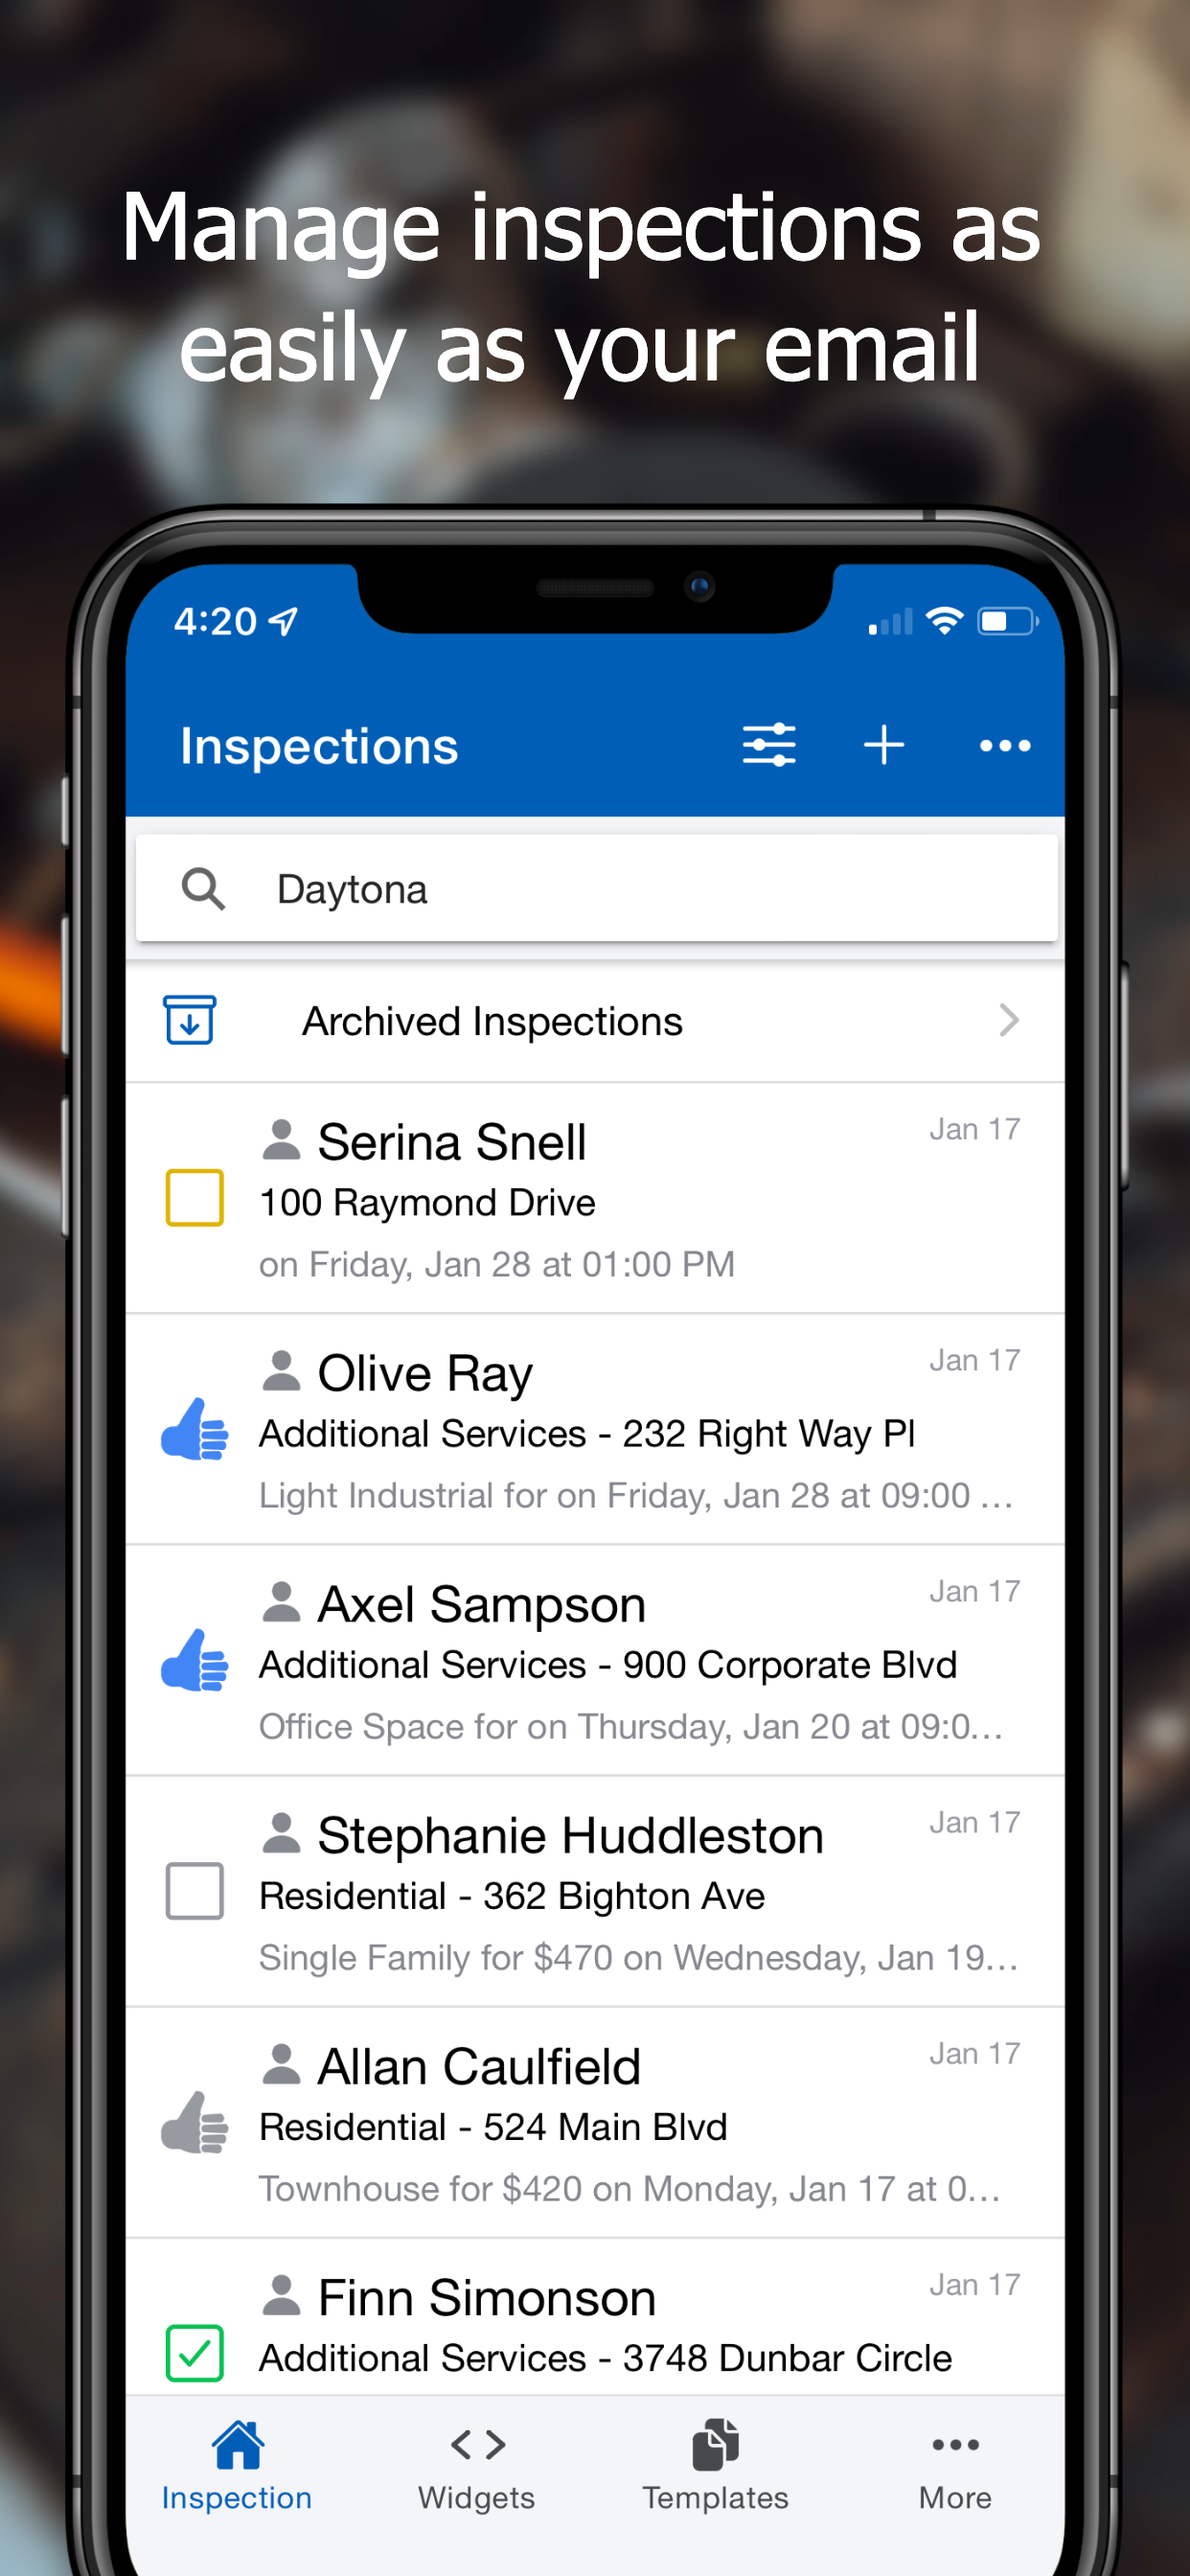 Manage inspections as easily as your email